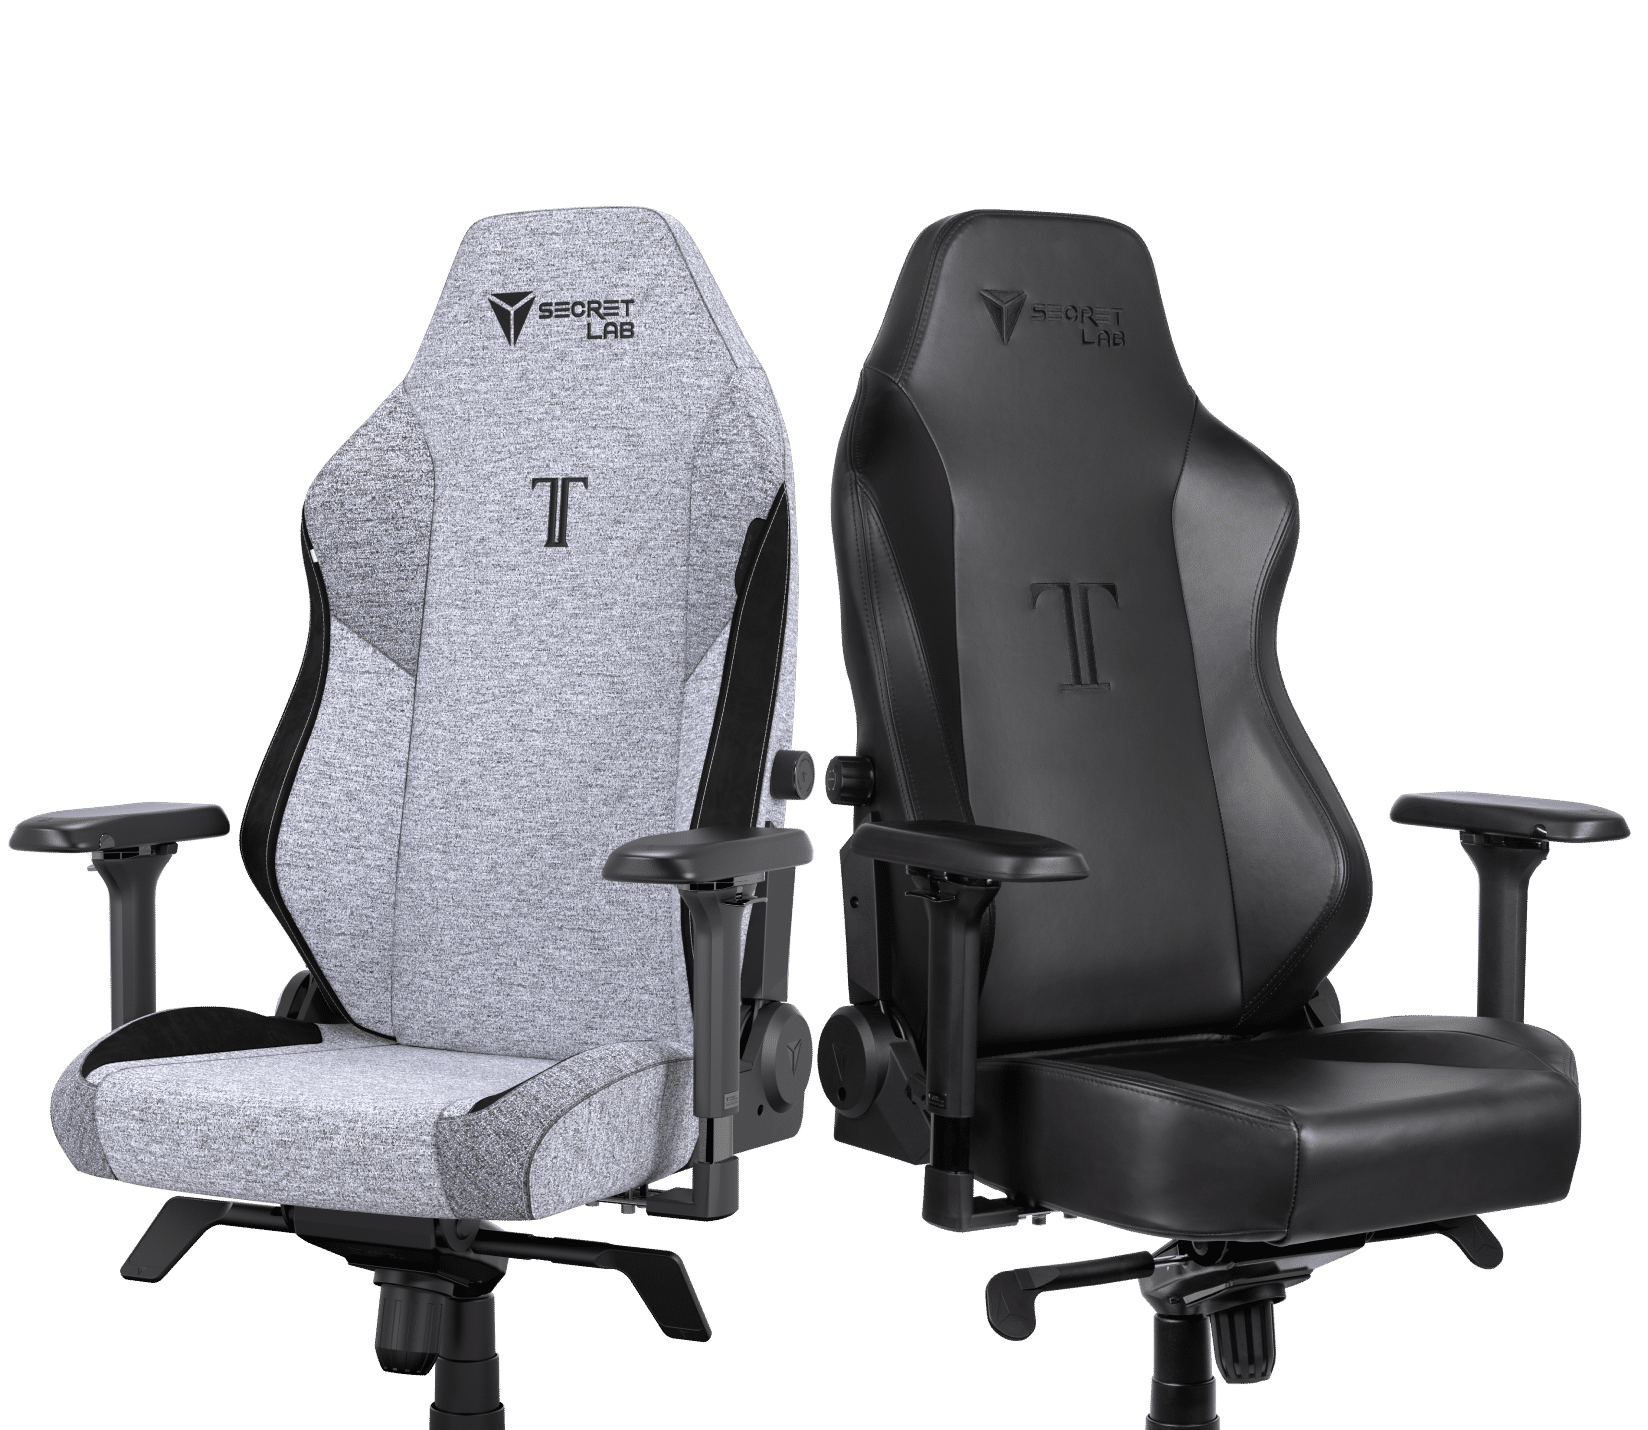 The Horde Plus chaise gaming massante ergonomique inclinable LED RGB